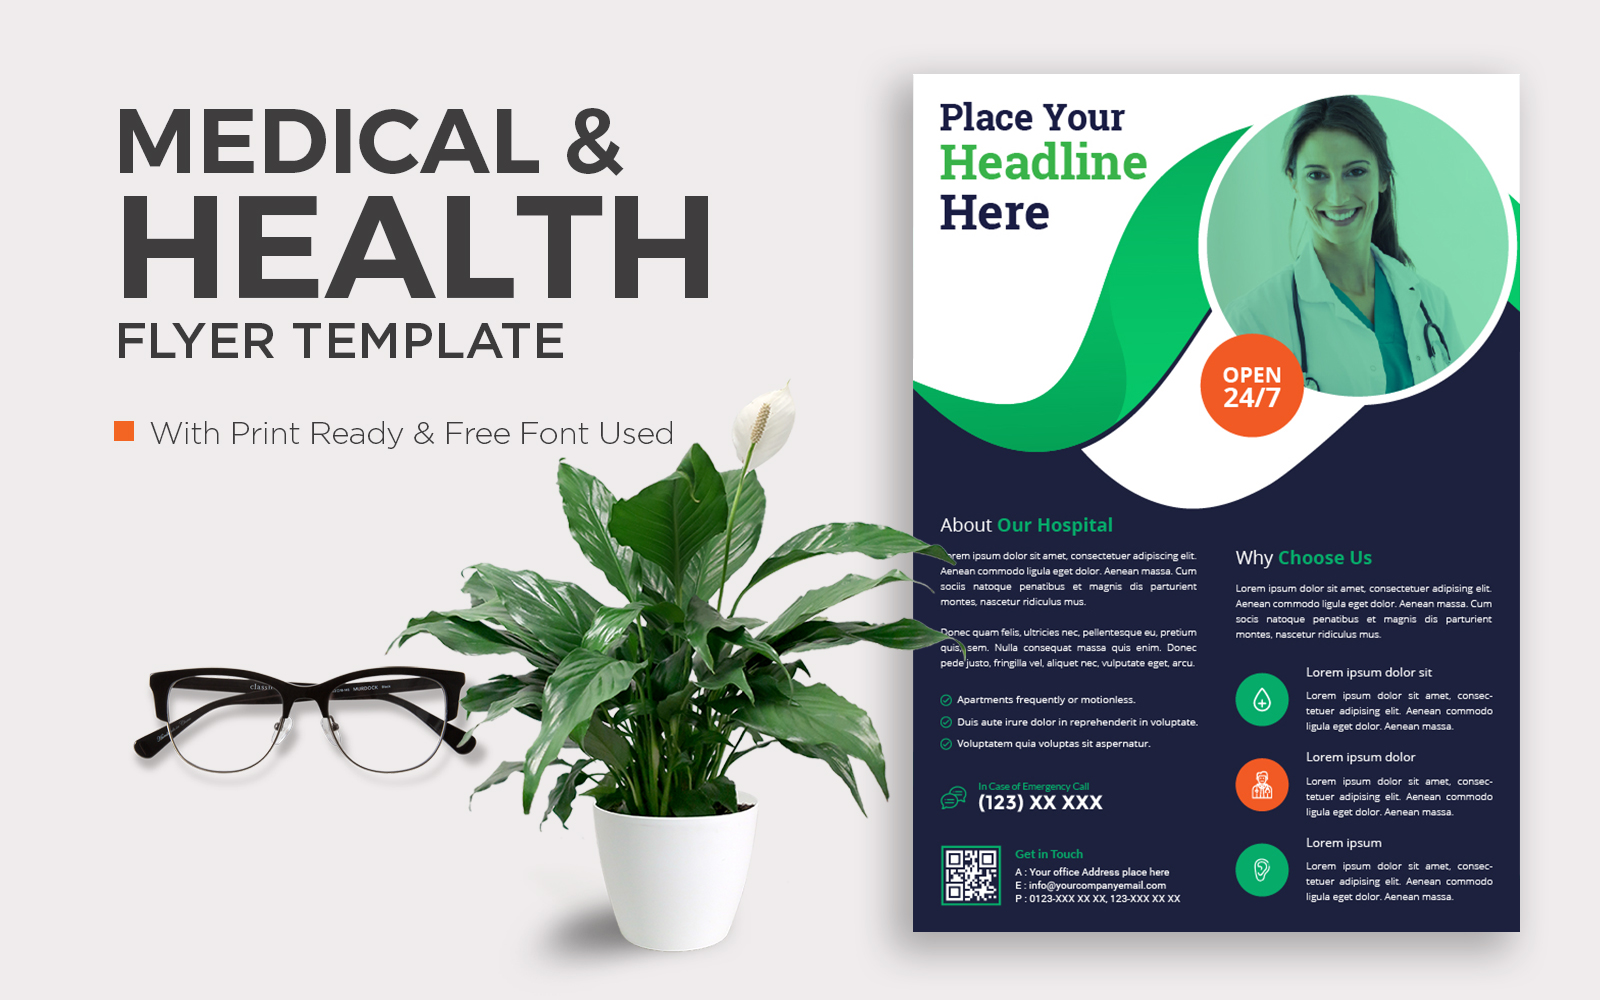 Medical Flyer for Business and Advertising Corporate identity template